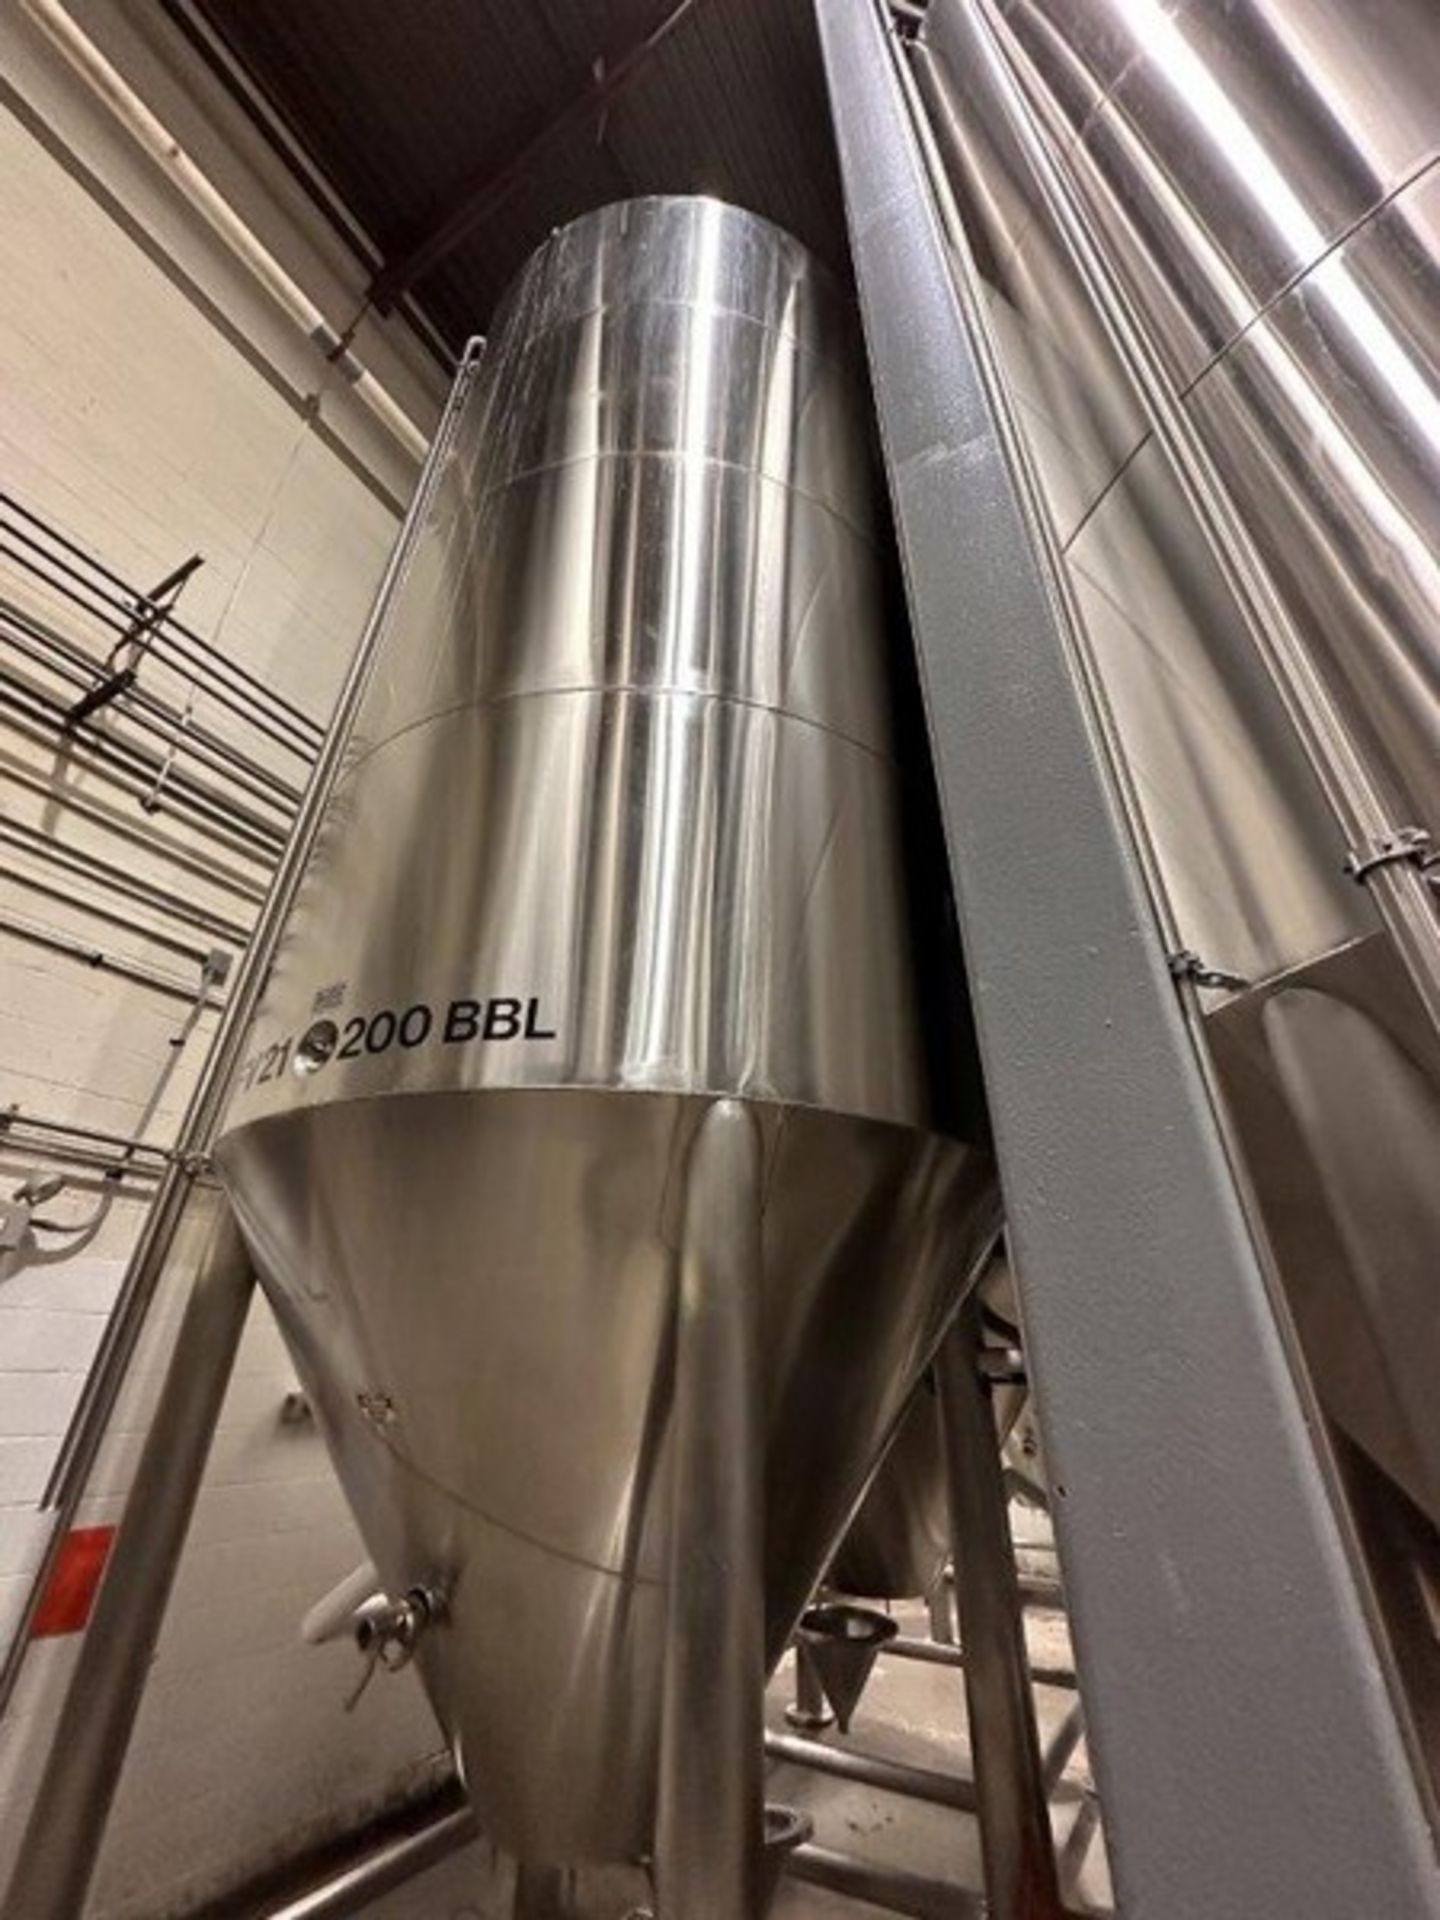 200BBL (7991 gallon) Vertical Cone Bottom 304 Stainless Steel Jacketed Vessel. Manufactured by JV No - Image 3 of 8